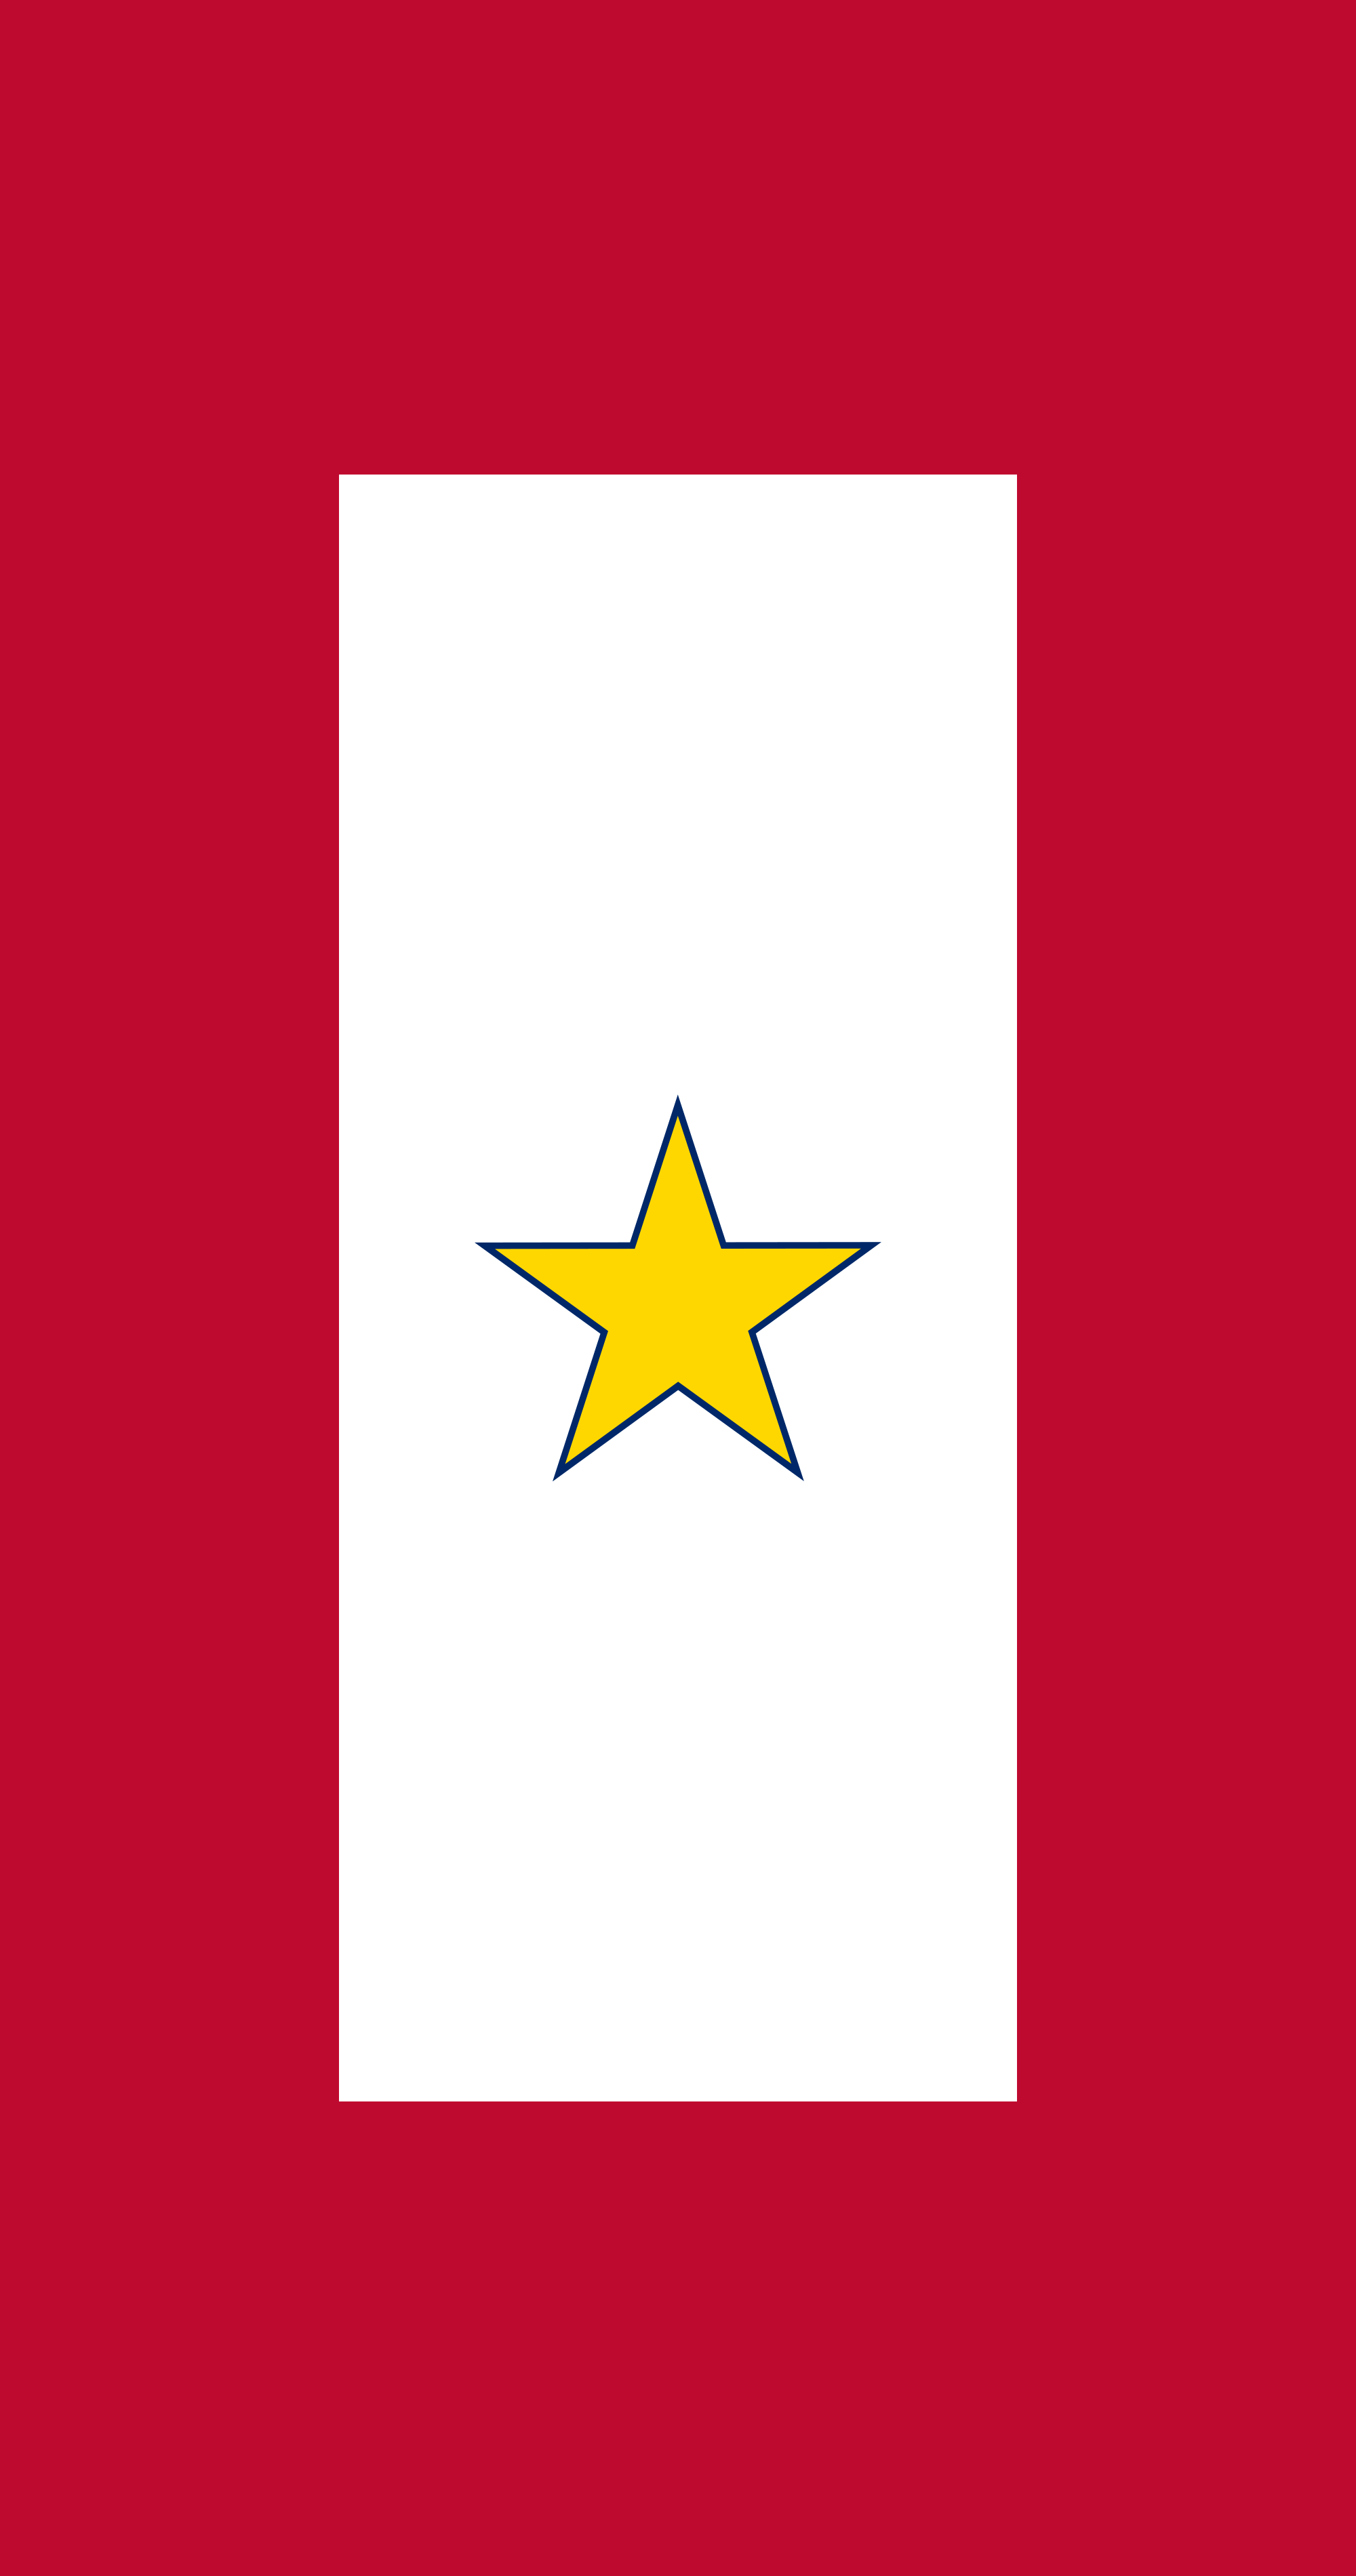 Red Yellow and Blue Star Logo - The History And Meaning Of Gold Star Mothers | WVXU